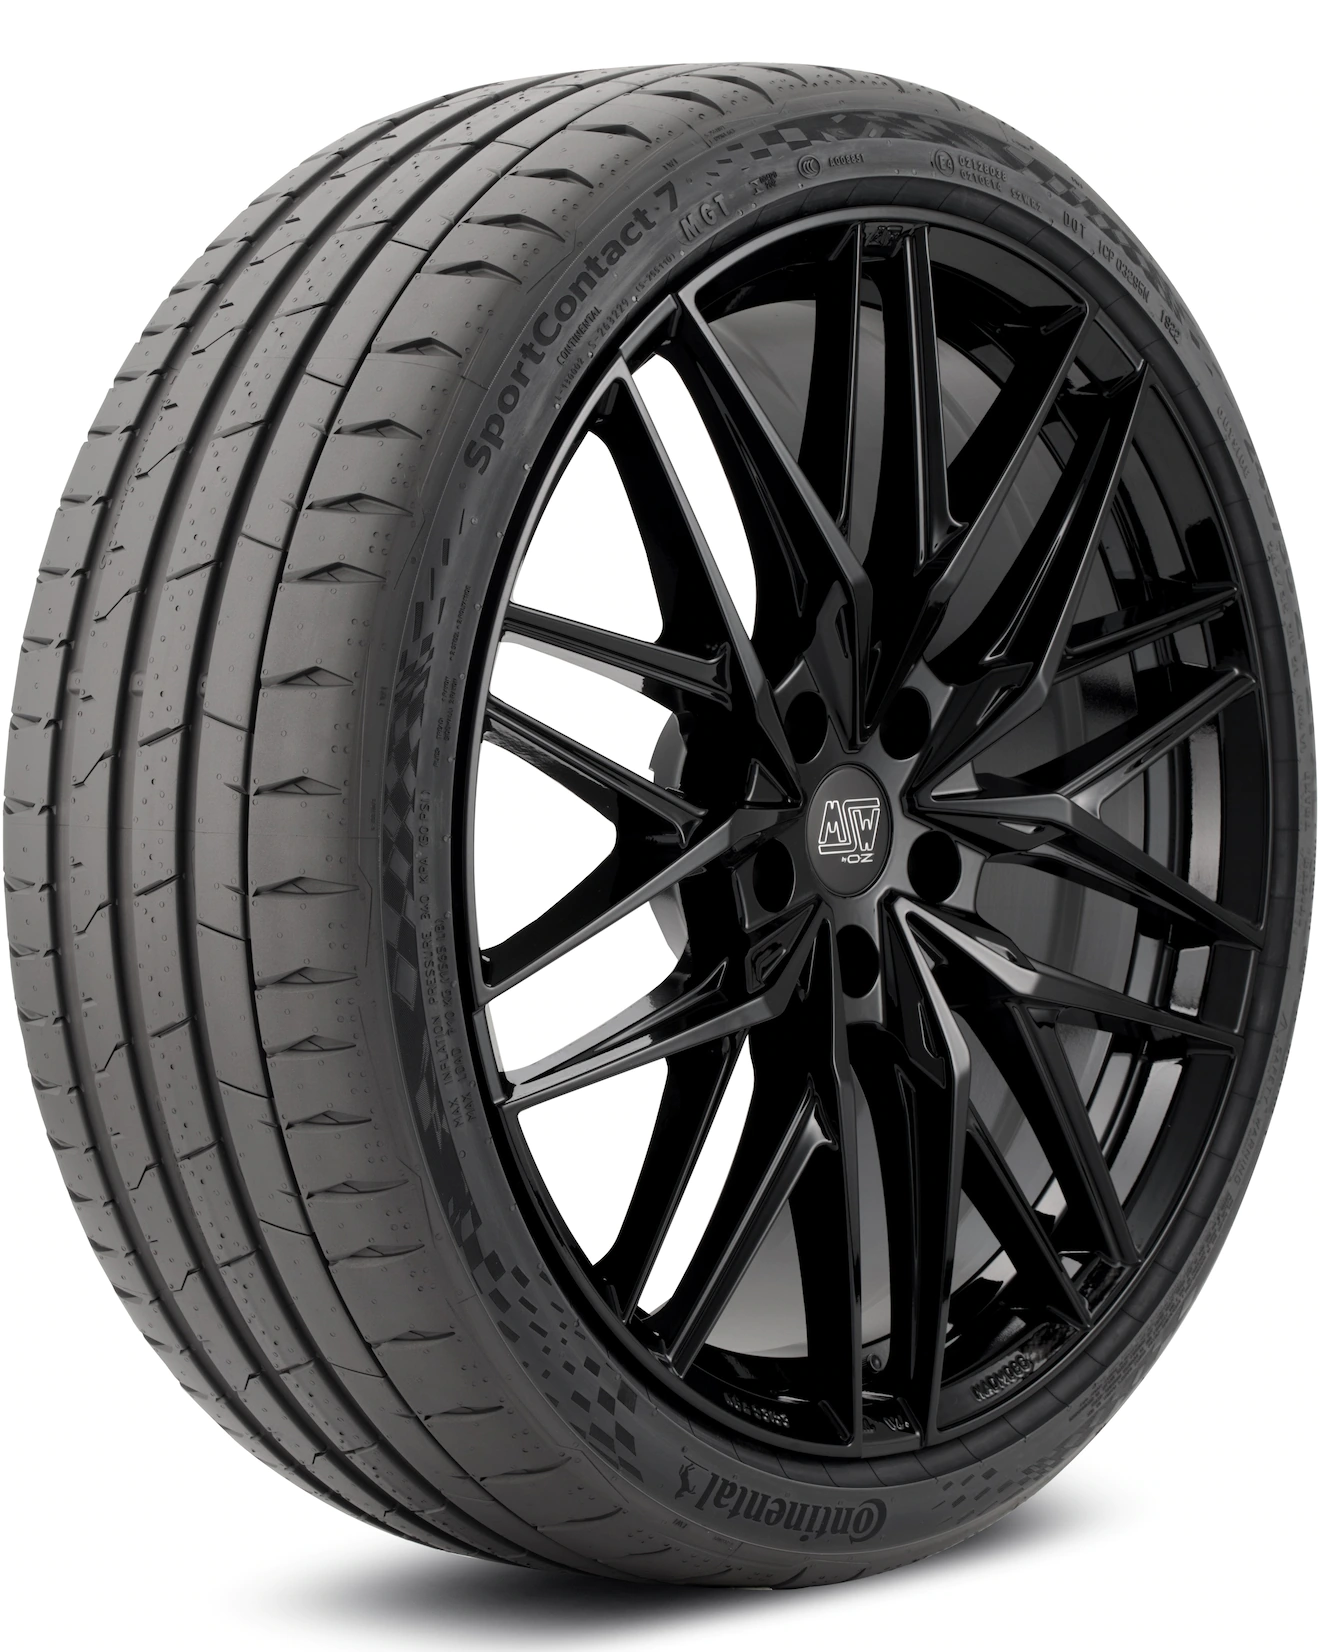 Continental SportContact 7 255/40 R21 102Y XL FP